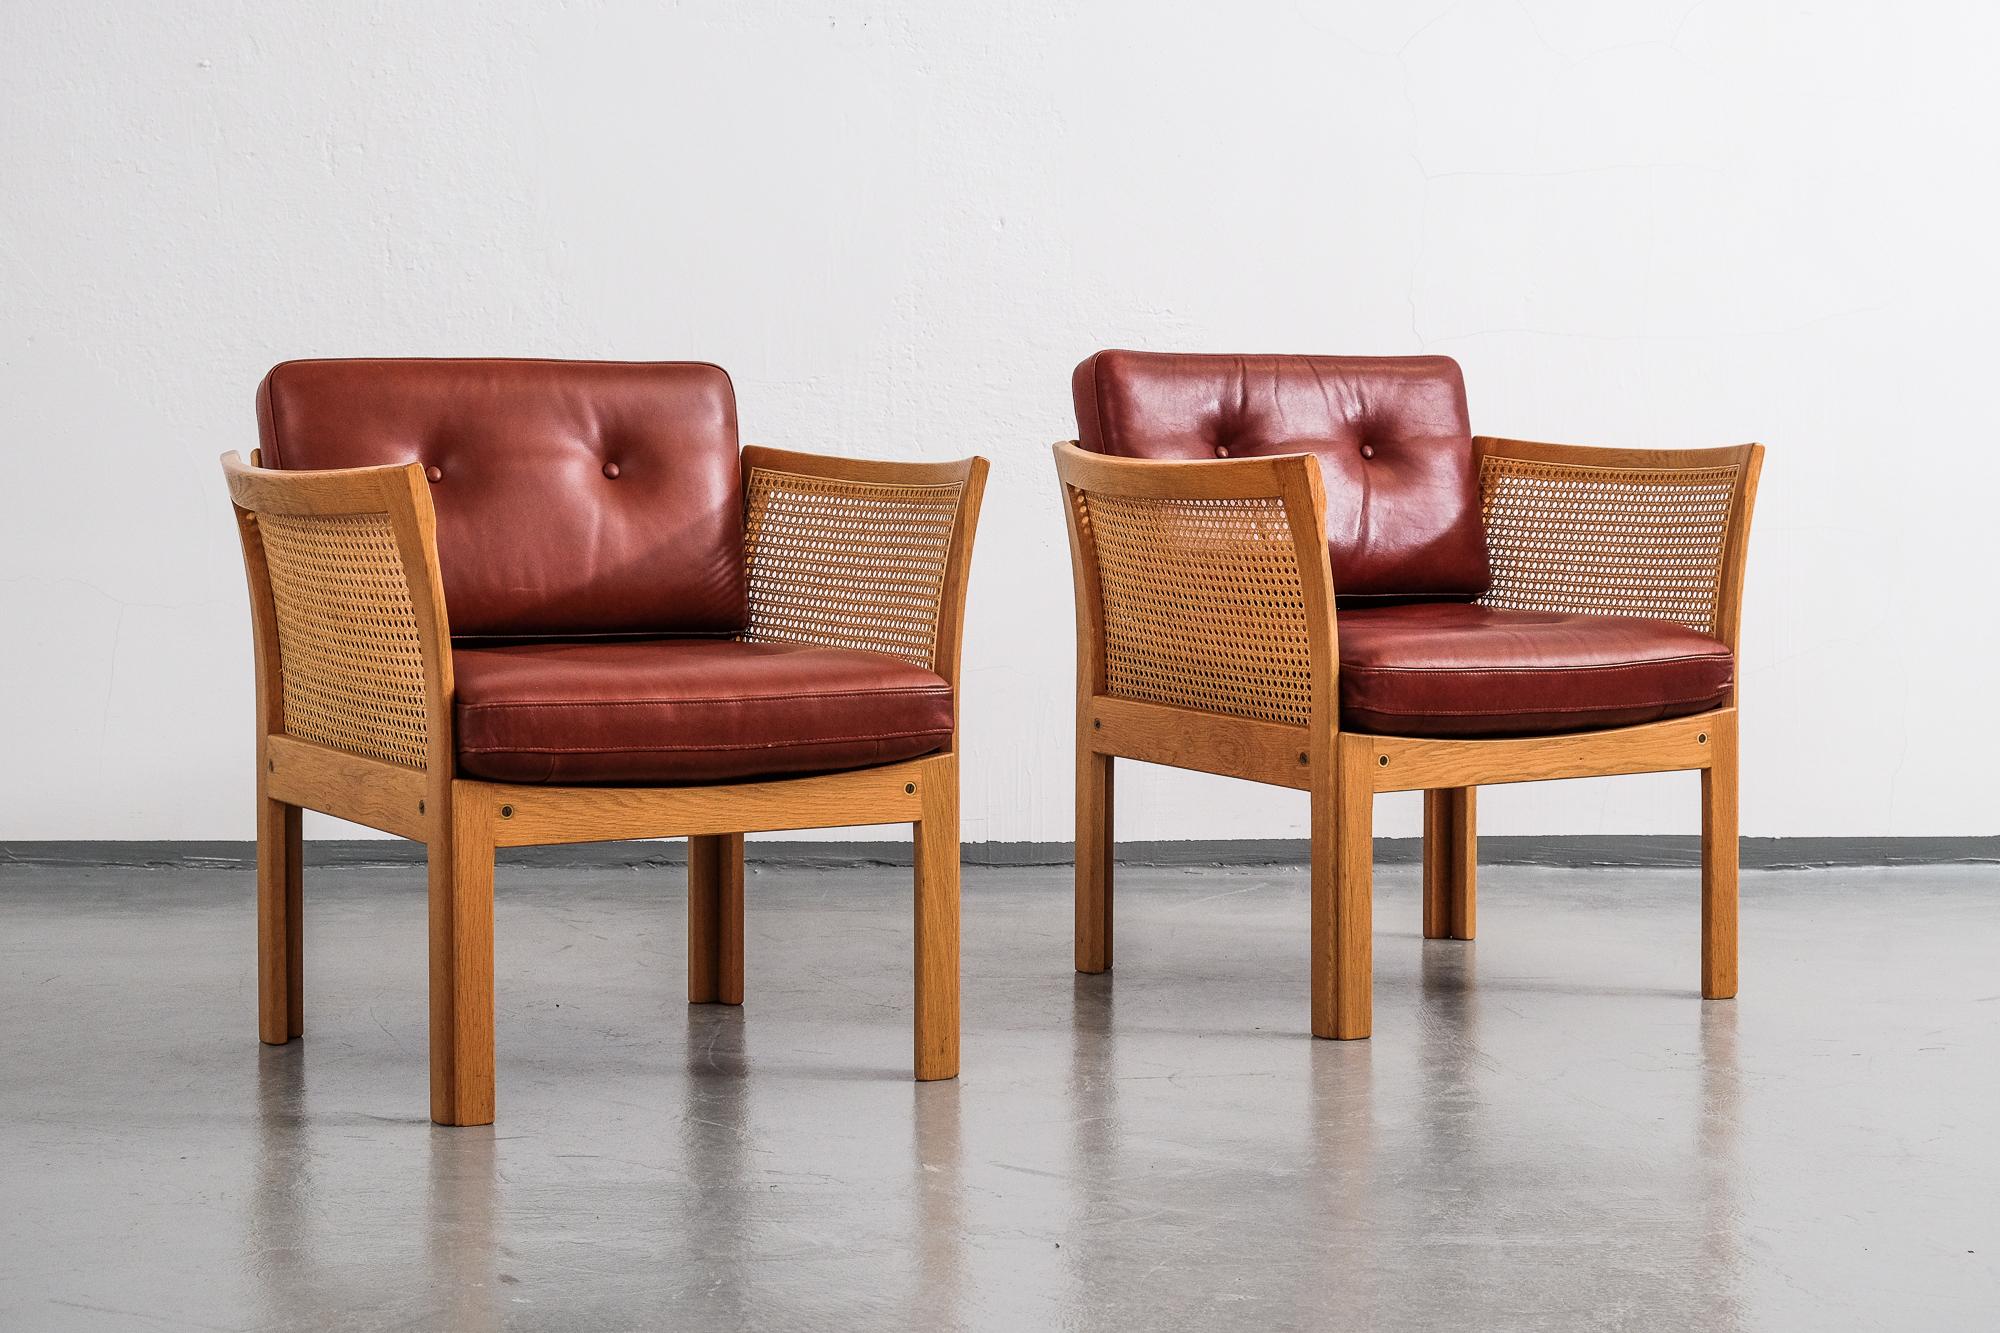 A pair of vintage Illum Wikkelsø 'Plexus' easy chairs in oak and cane.
Loose cushions upholstered in coqnac leather.

Produced by C.F. Christensen.